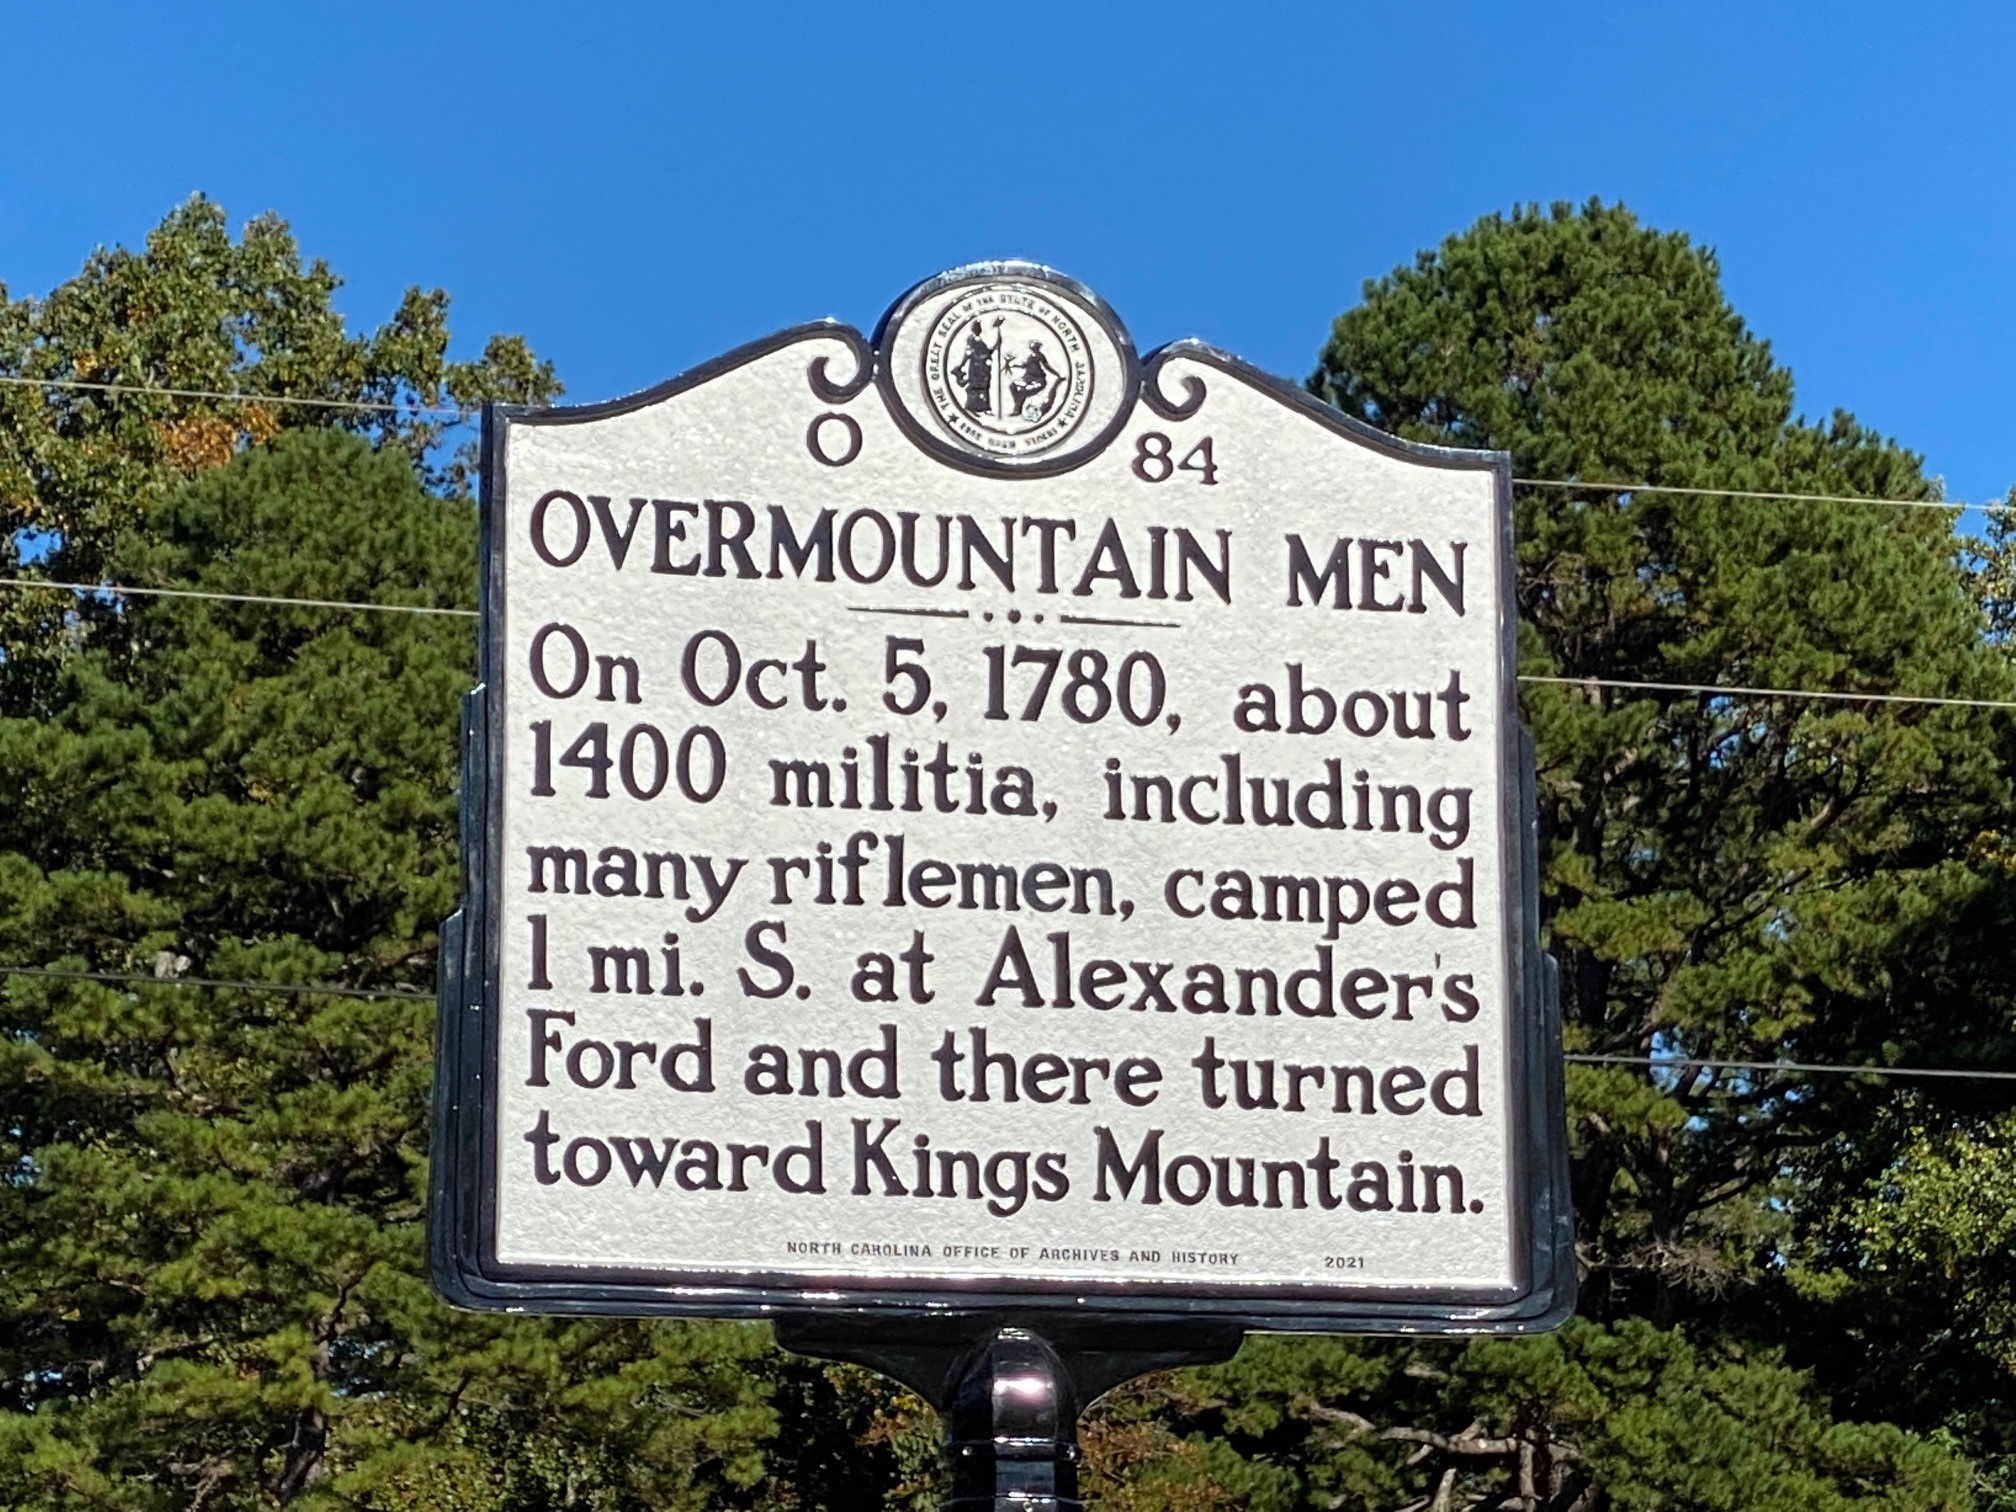 Metal sign discussing a camp of the overmountain men. Gray metal sign with black writing. 